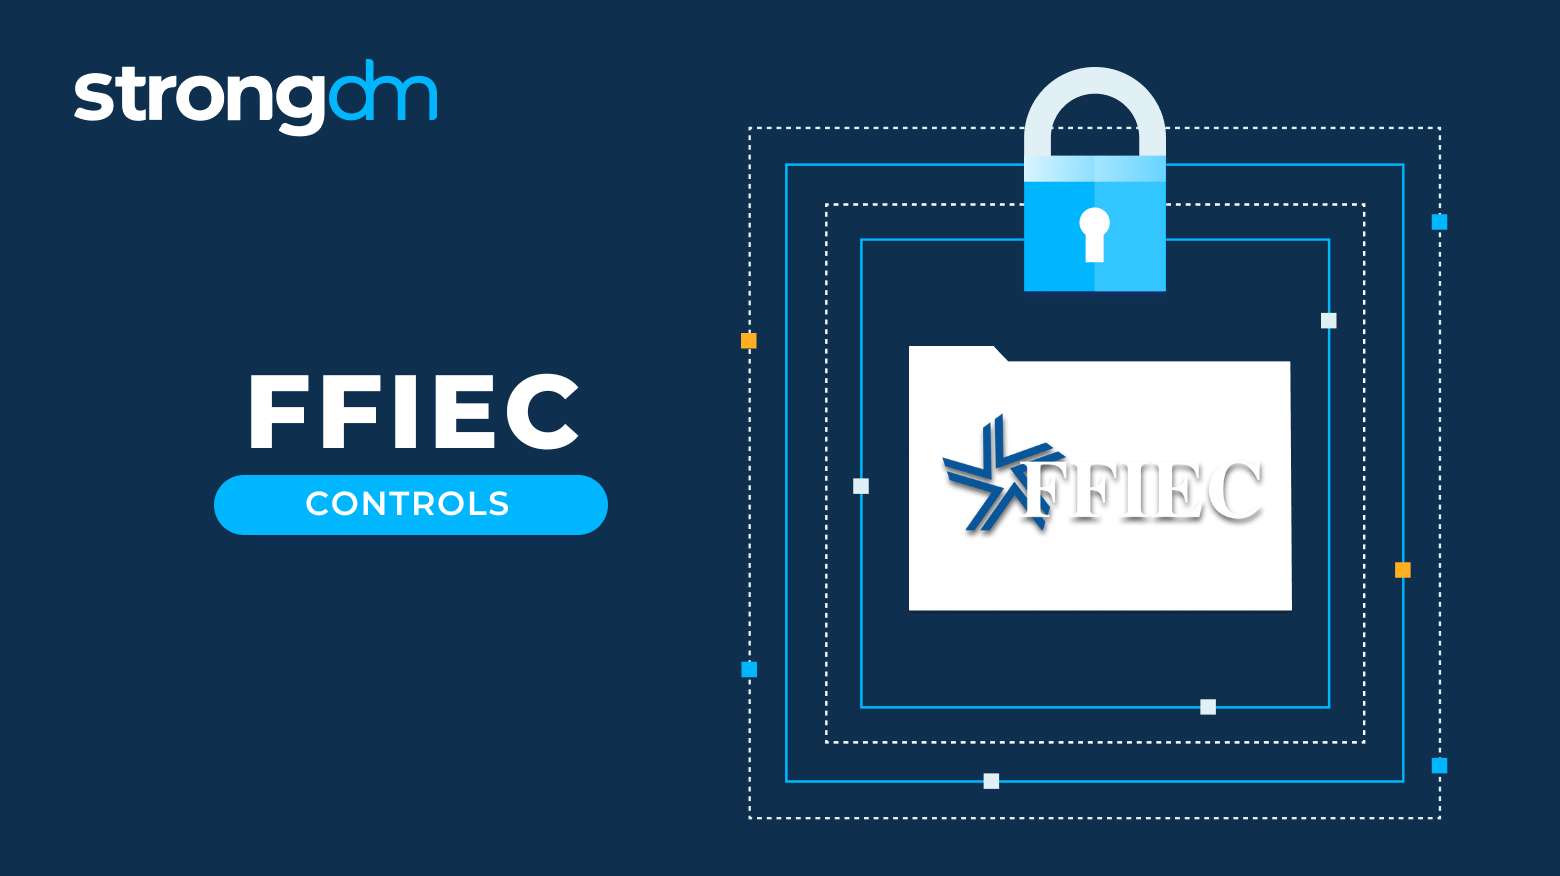 Ensure Secure Access and Mitigate Threats to FFIEC Controls